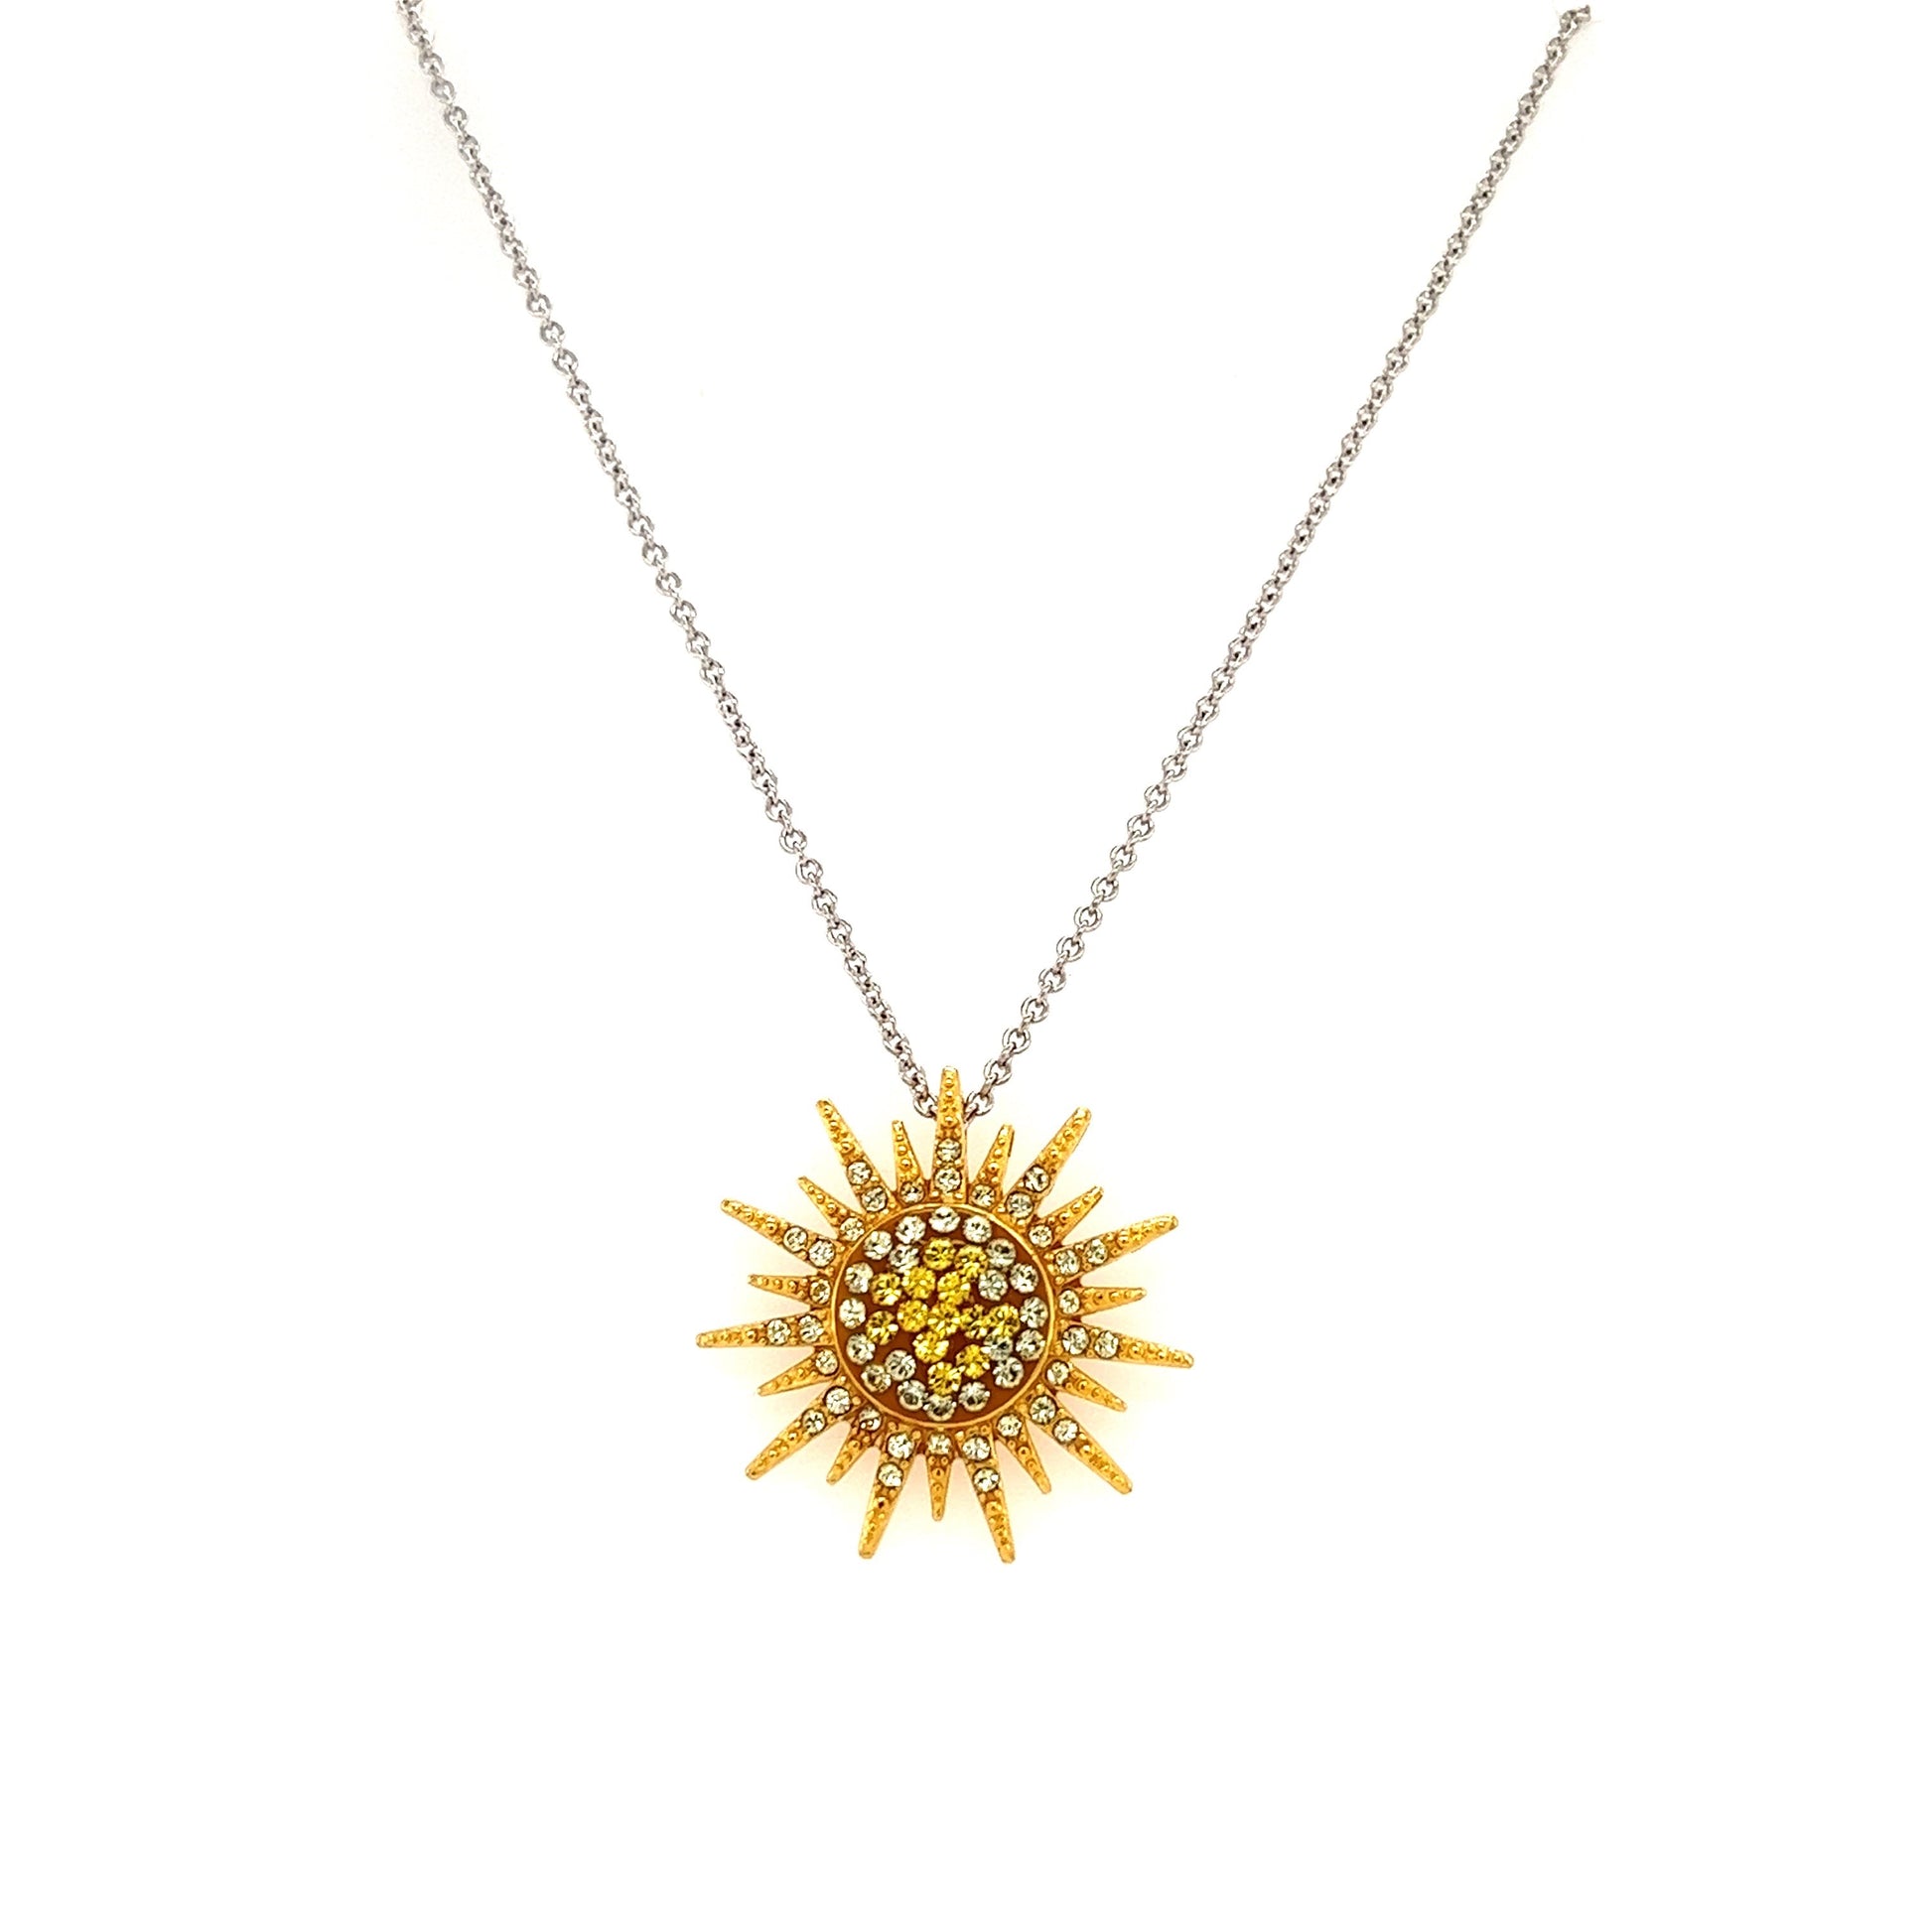 Sunburst Necklace With Yellow and White Crystals in Sterling Silver Front View